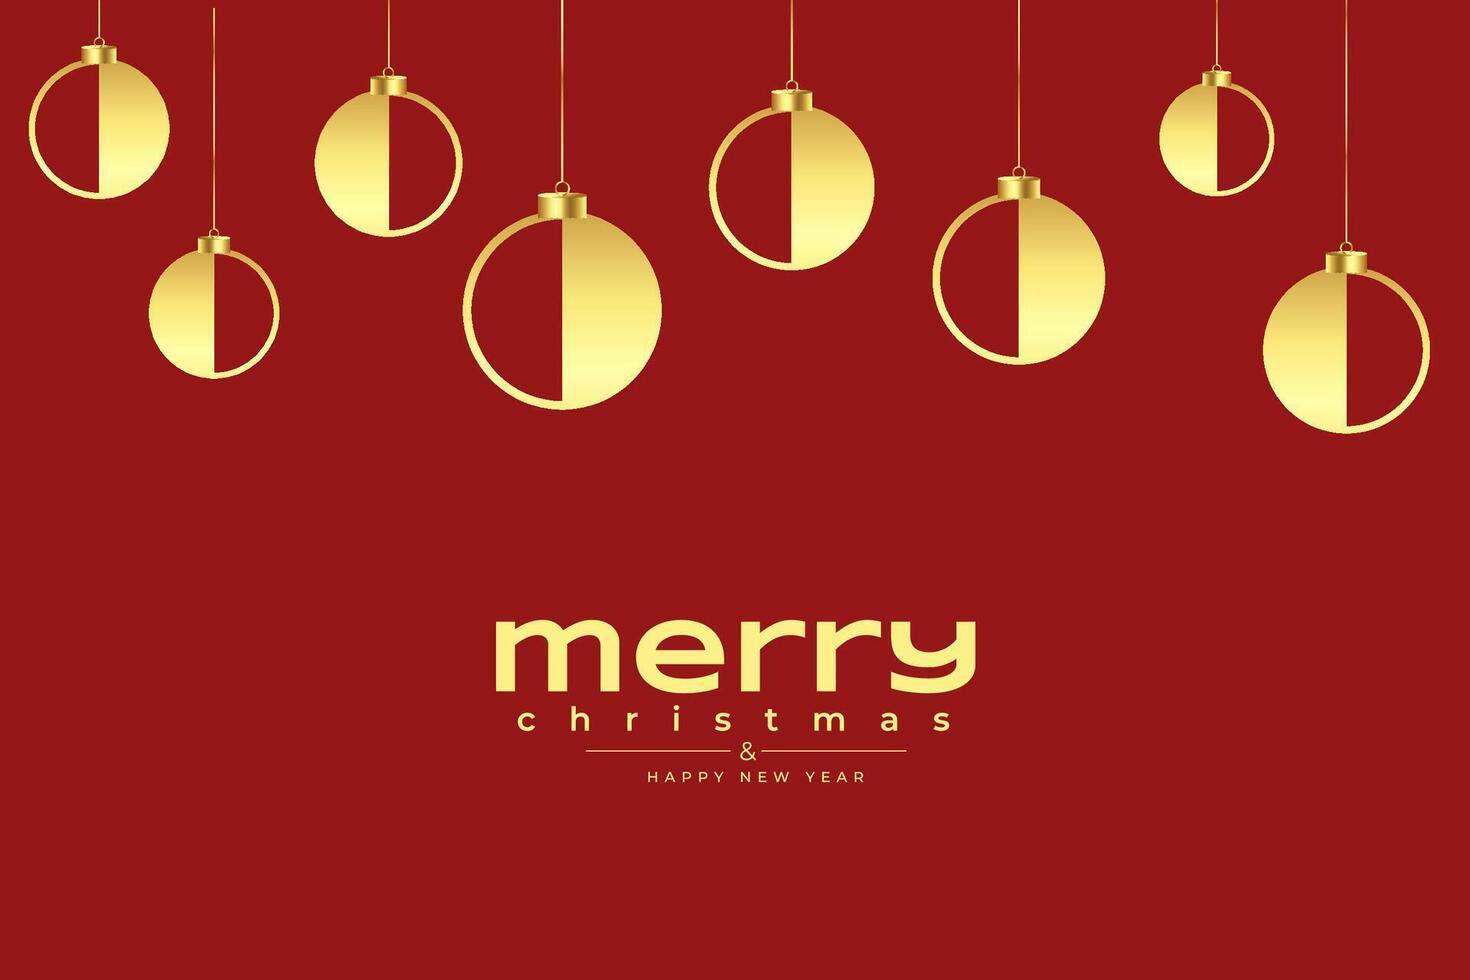 merry christmas festive season background with hanging bauble vector